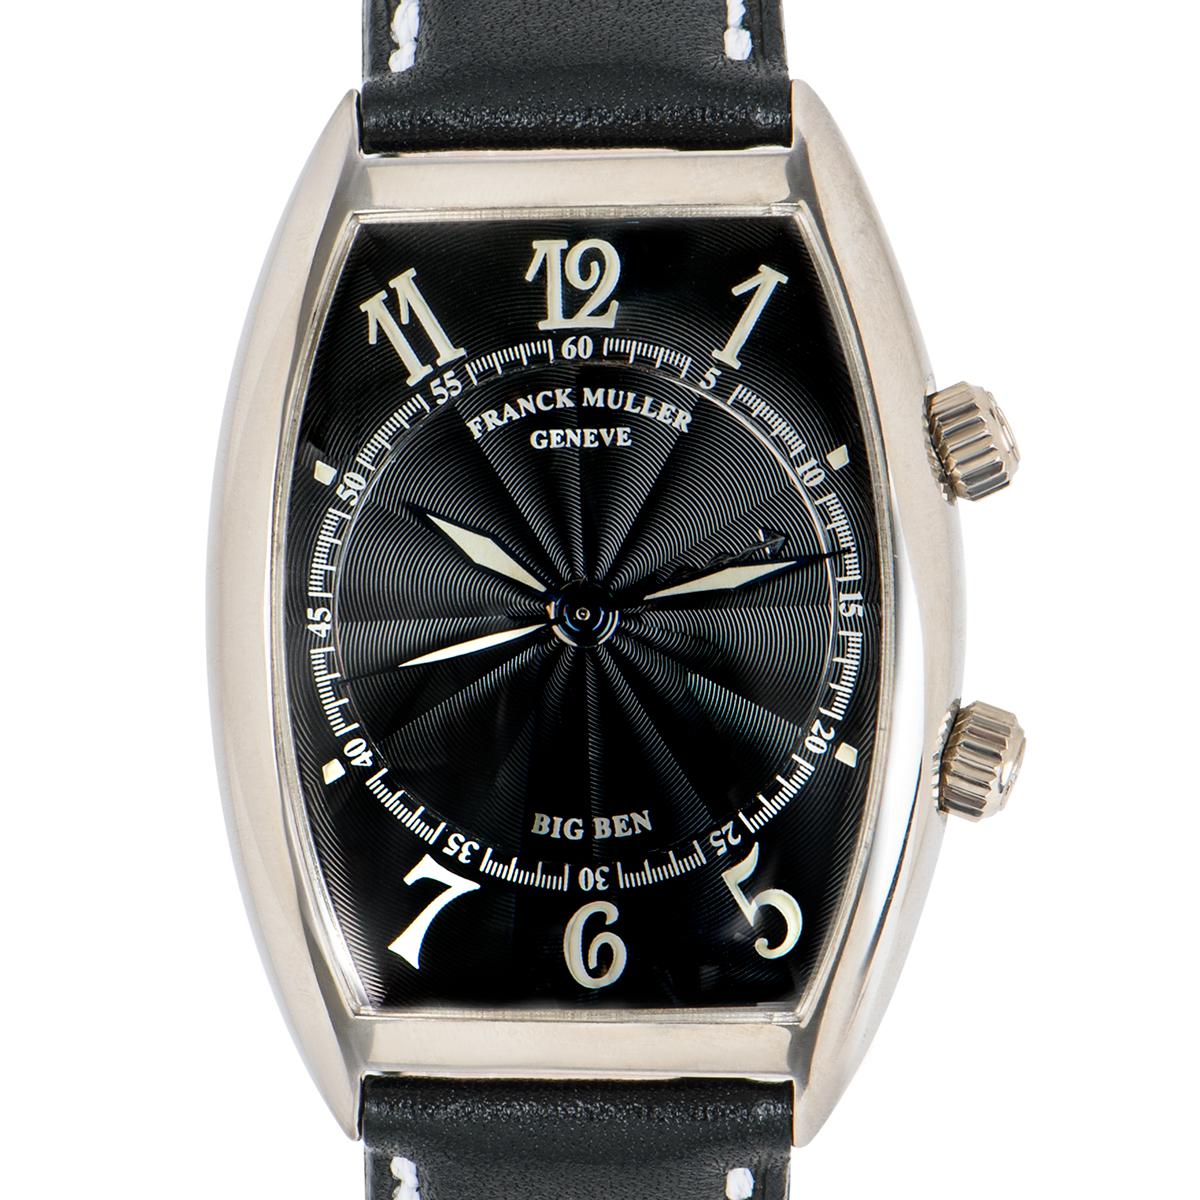 A Big Ben alarm men's wristwatch, by Franck Muller.

The black guilloche dial with arabic numbers is encased behind a sapphire crystal, in an 18k white gold tonneau-shaped case. There is an additional crown, on the side of the case at 2 o'clock,